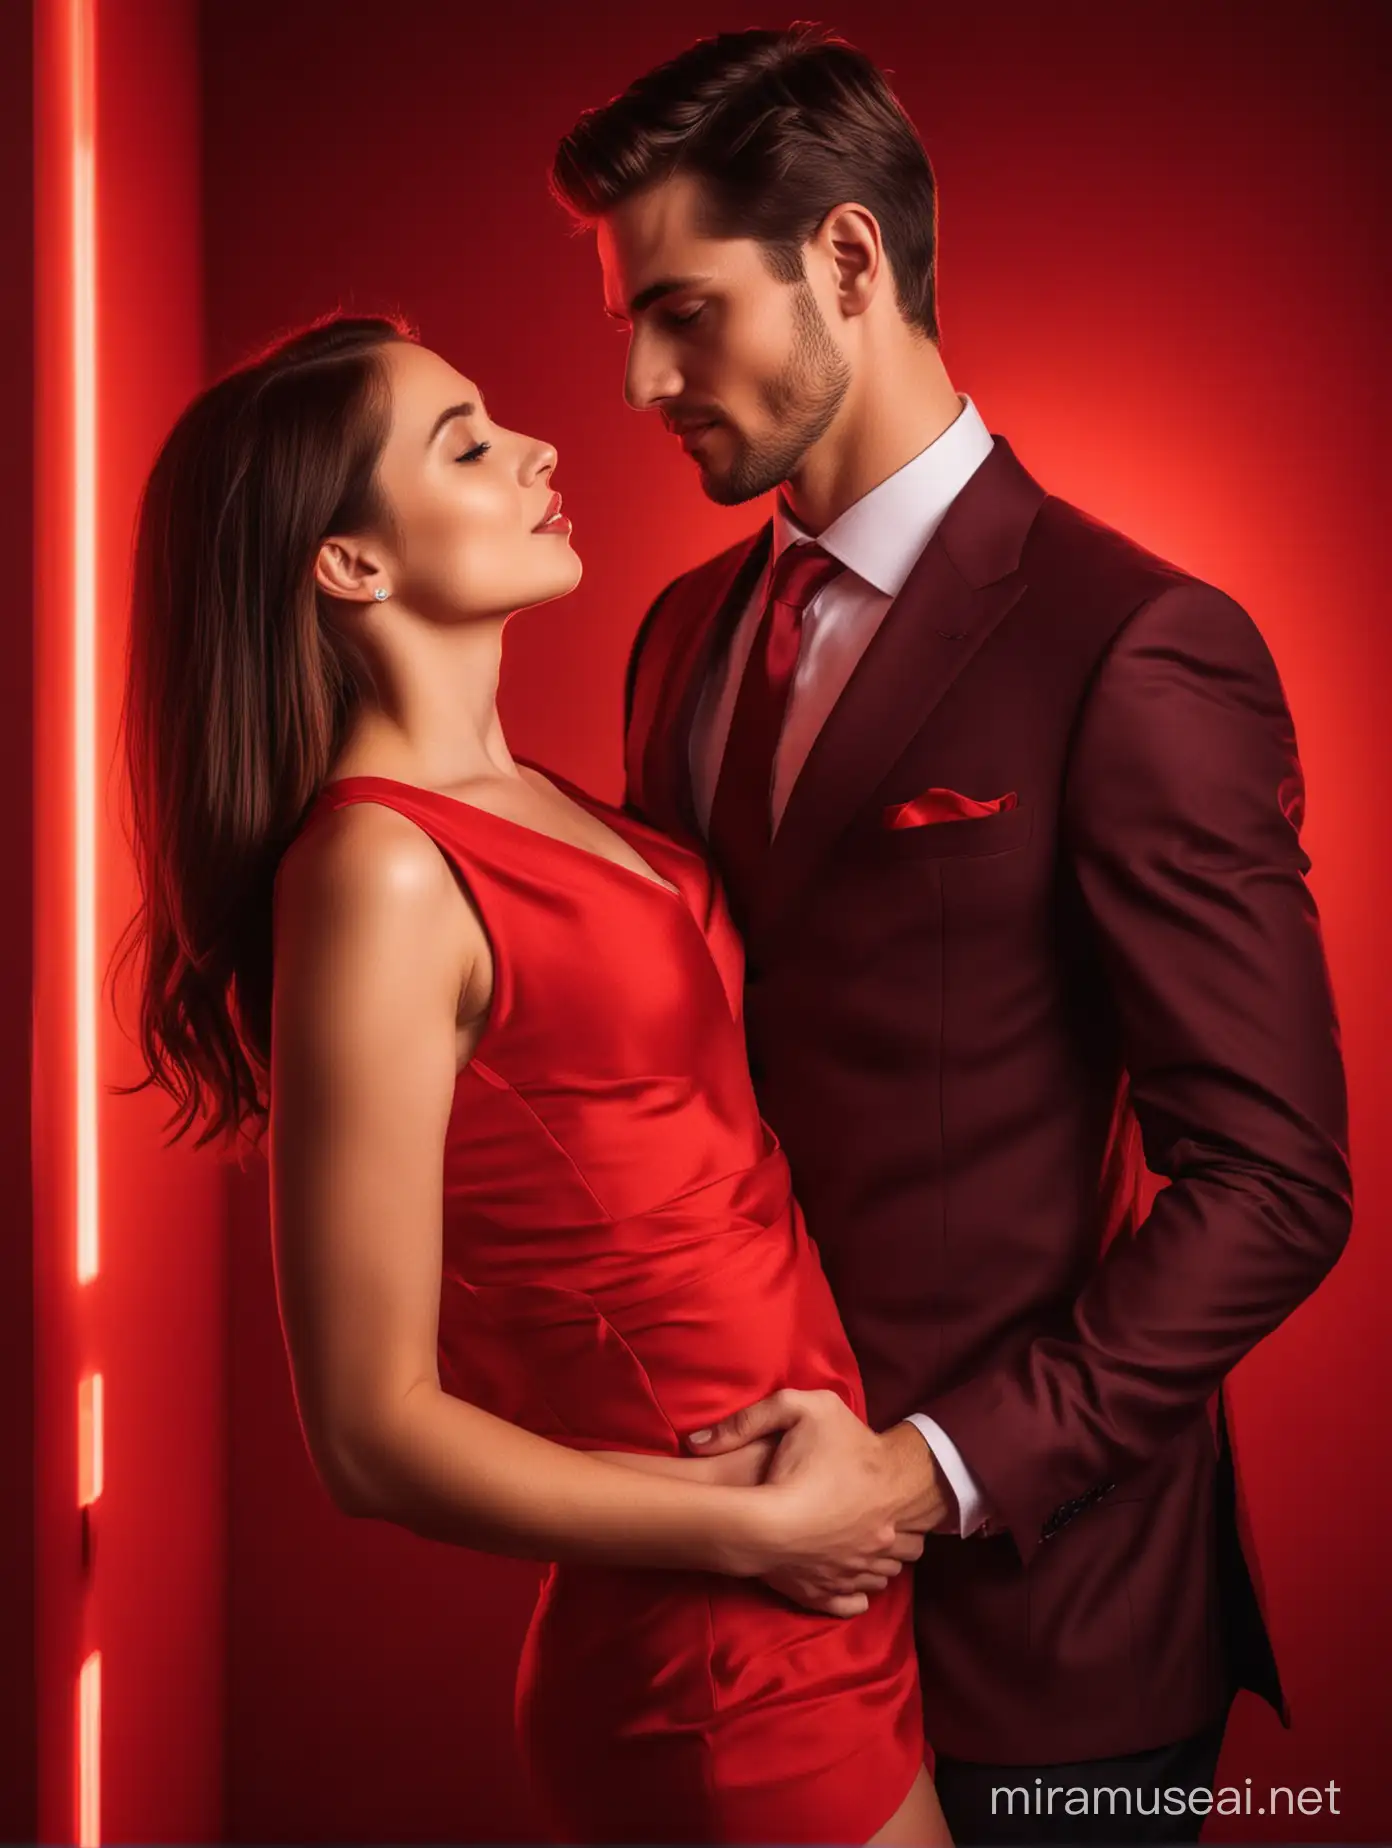 Romantic Couple Embraced in Red Glow